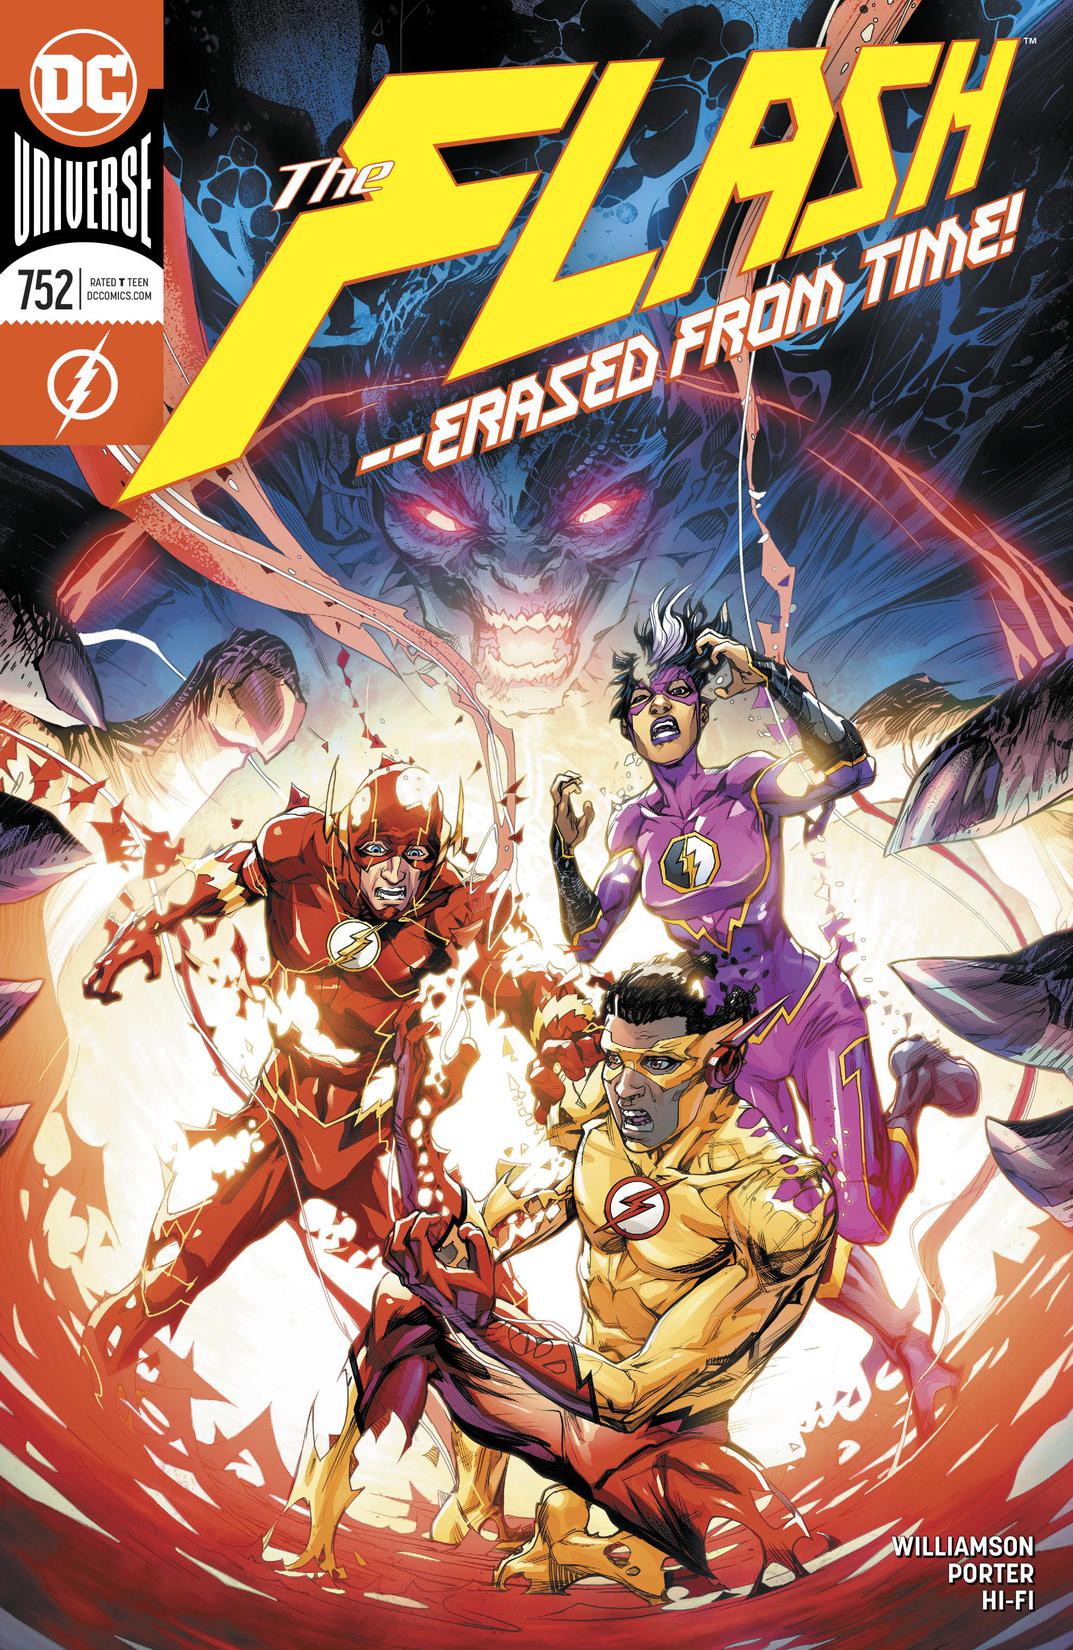 The Flash (2016-) #752 preview images